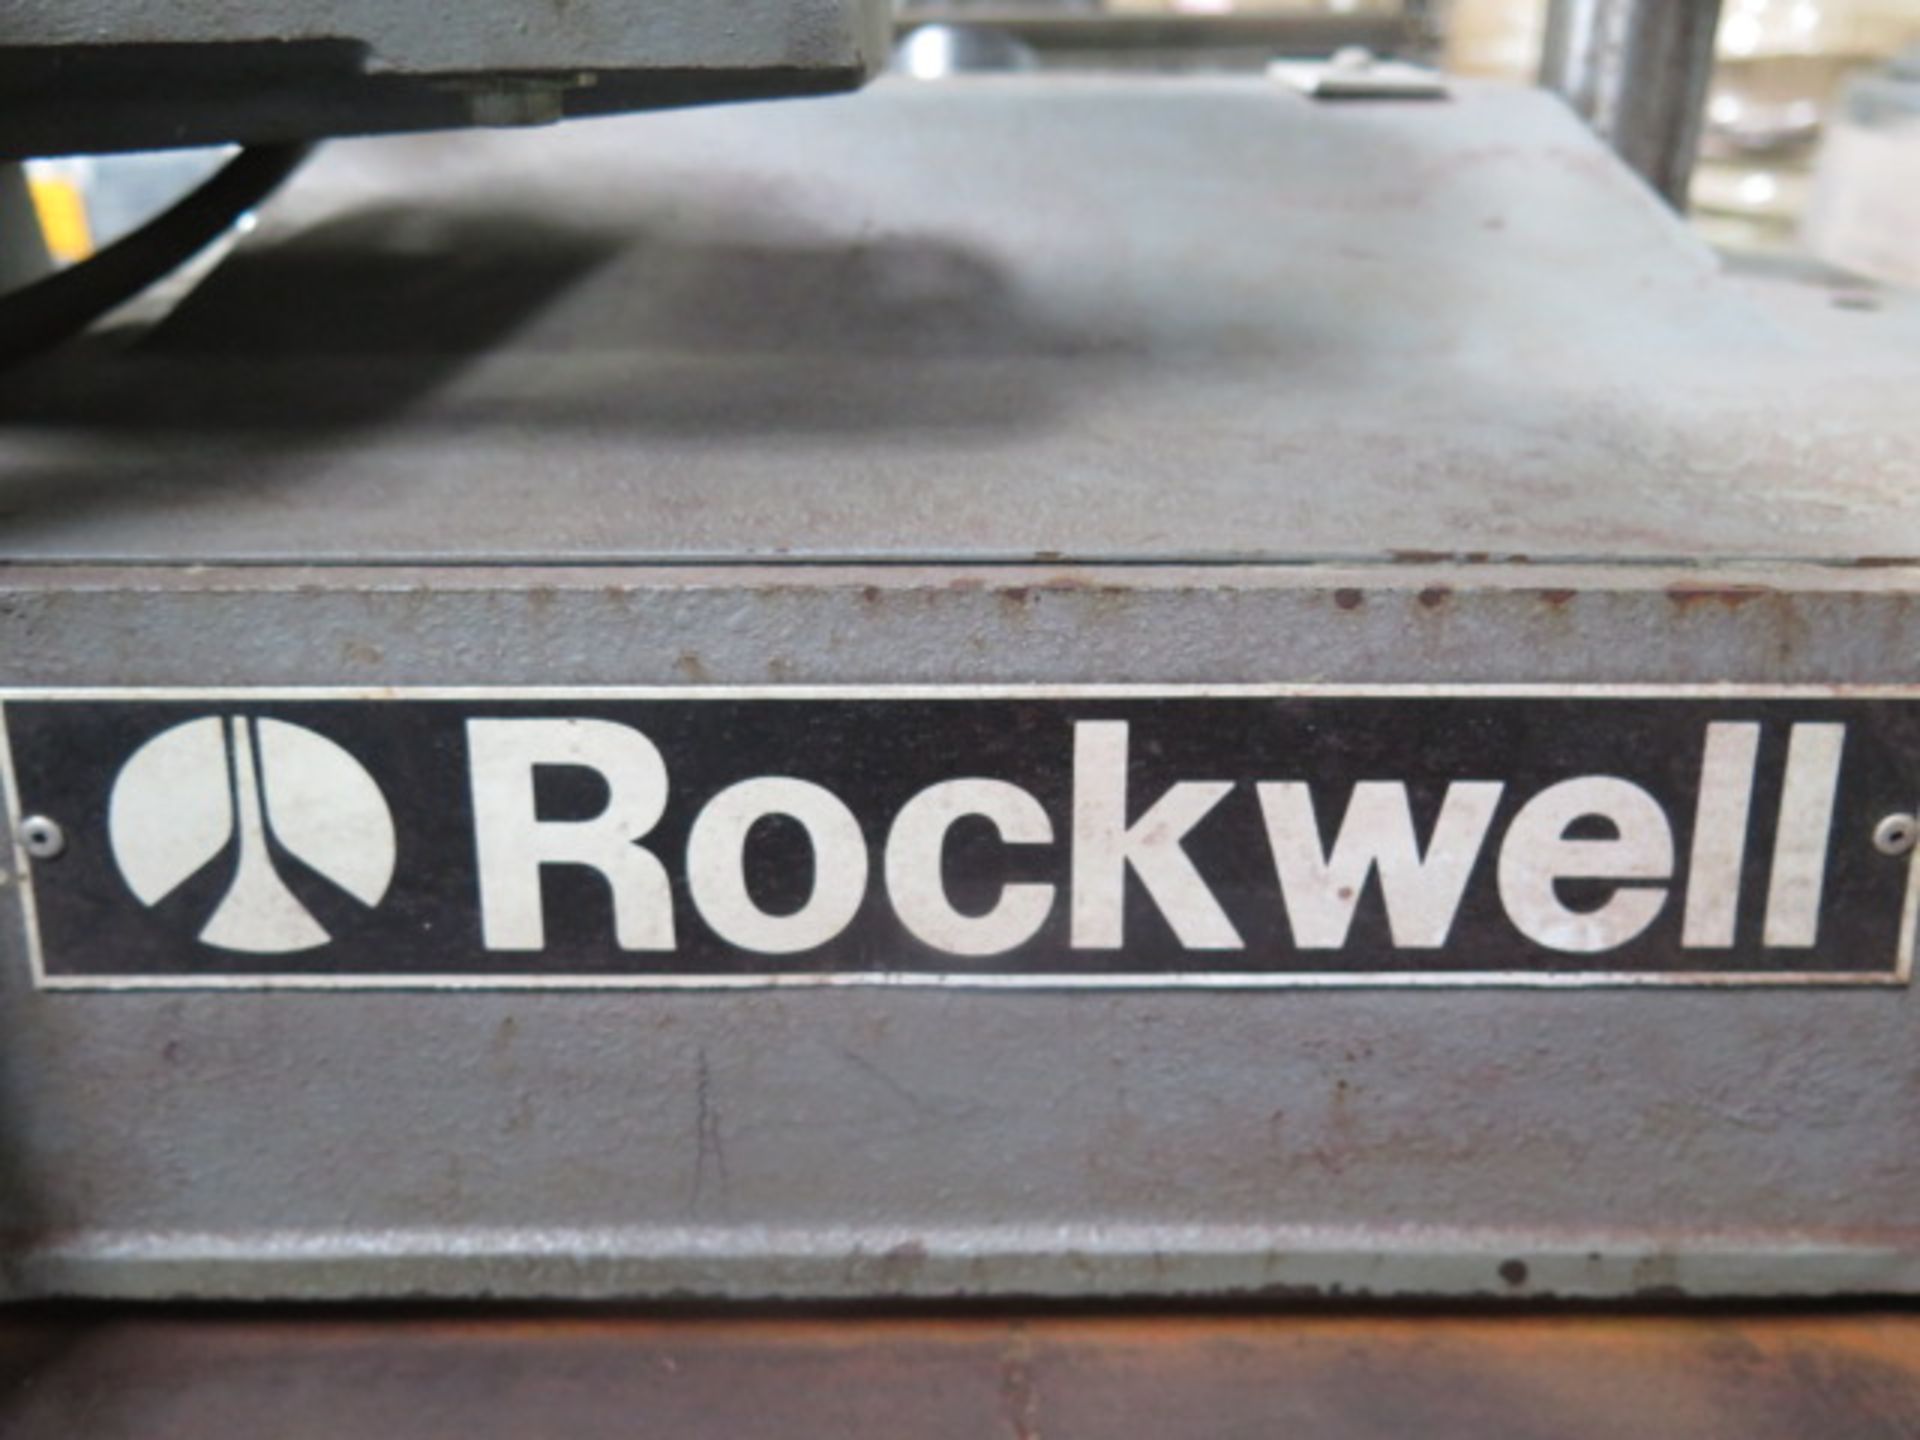 Rockwell 12" Paliner w/ Stand (SOLD AS-IS - NO WARRANTY) - Image 8 of 8